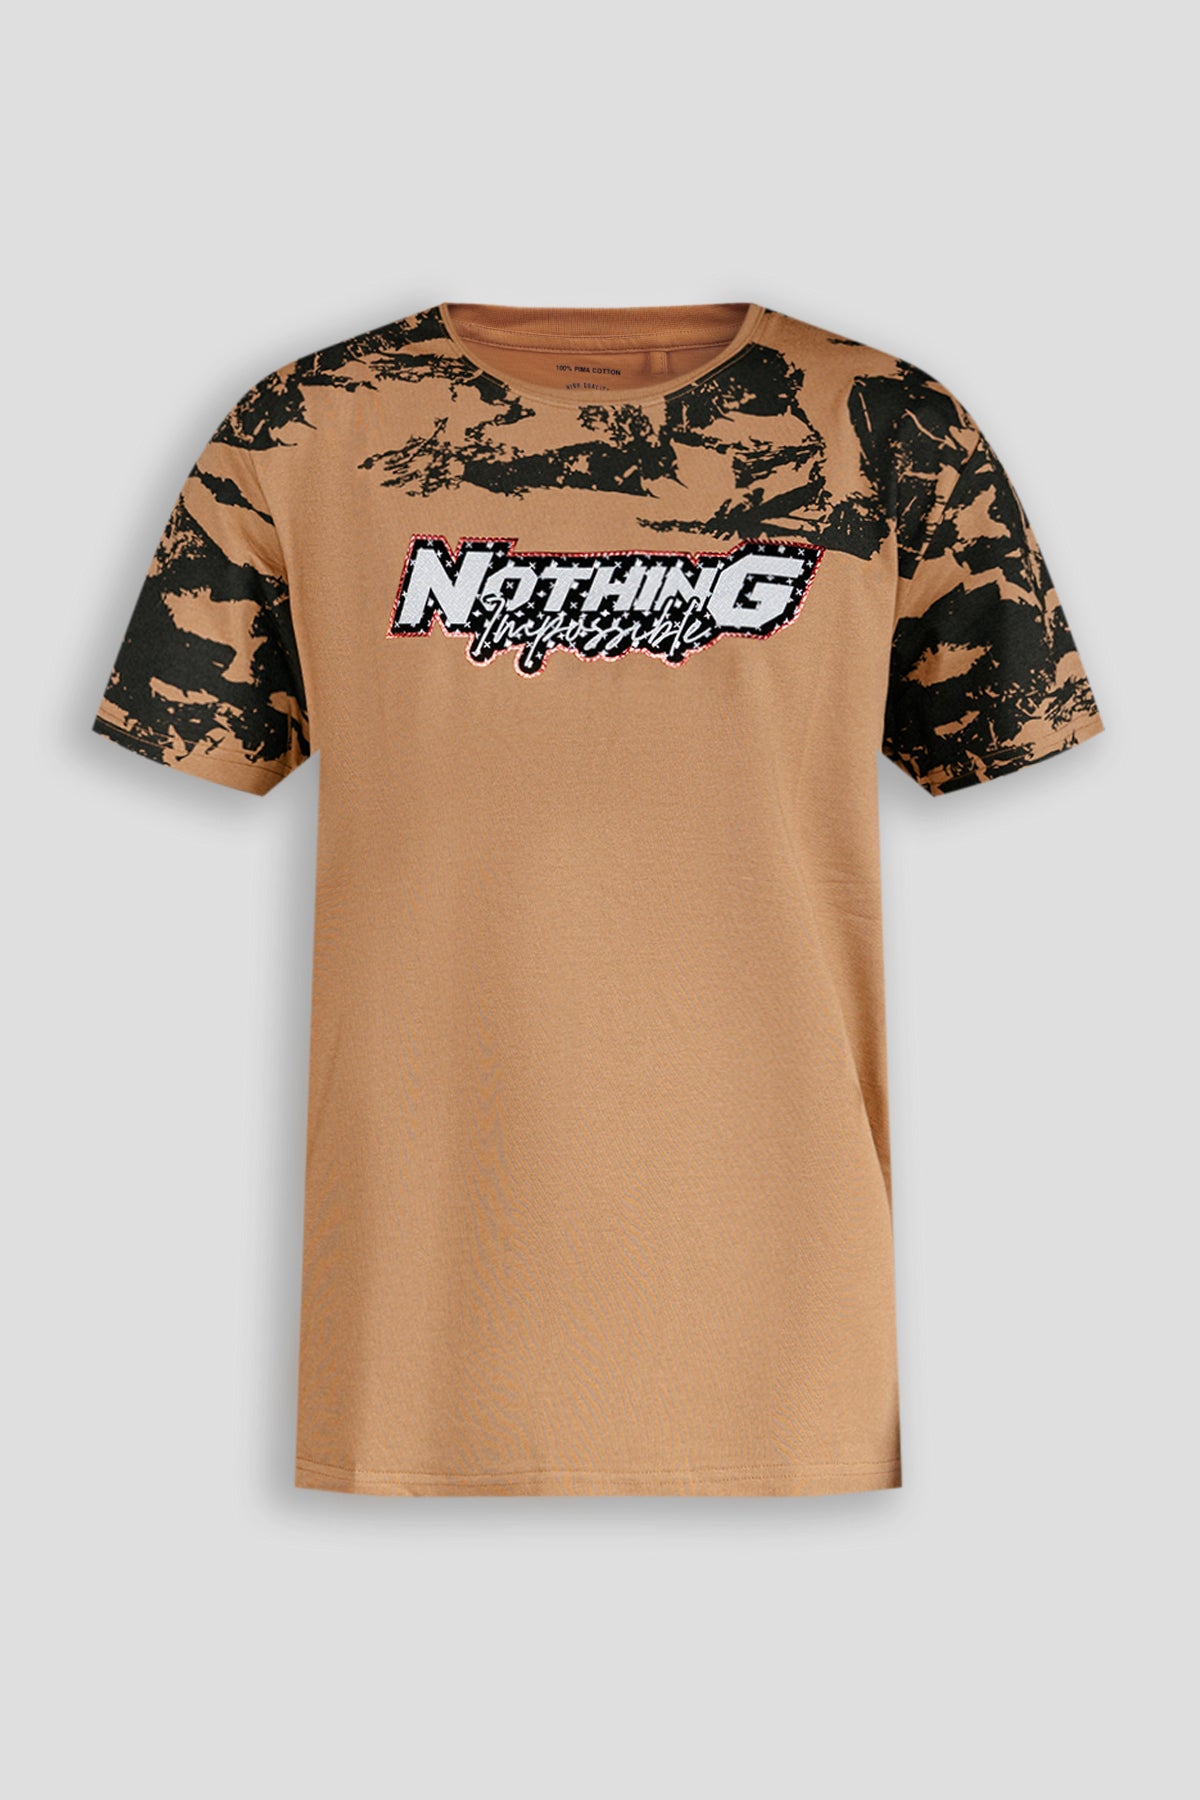 "Nothing Impossible" Graphic Tee